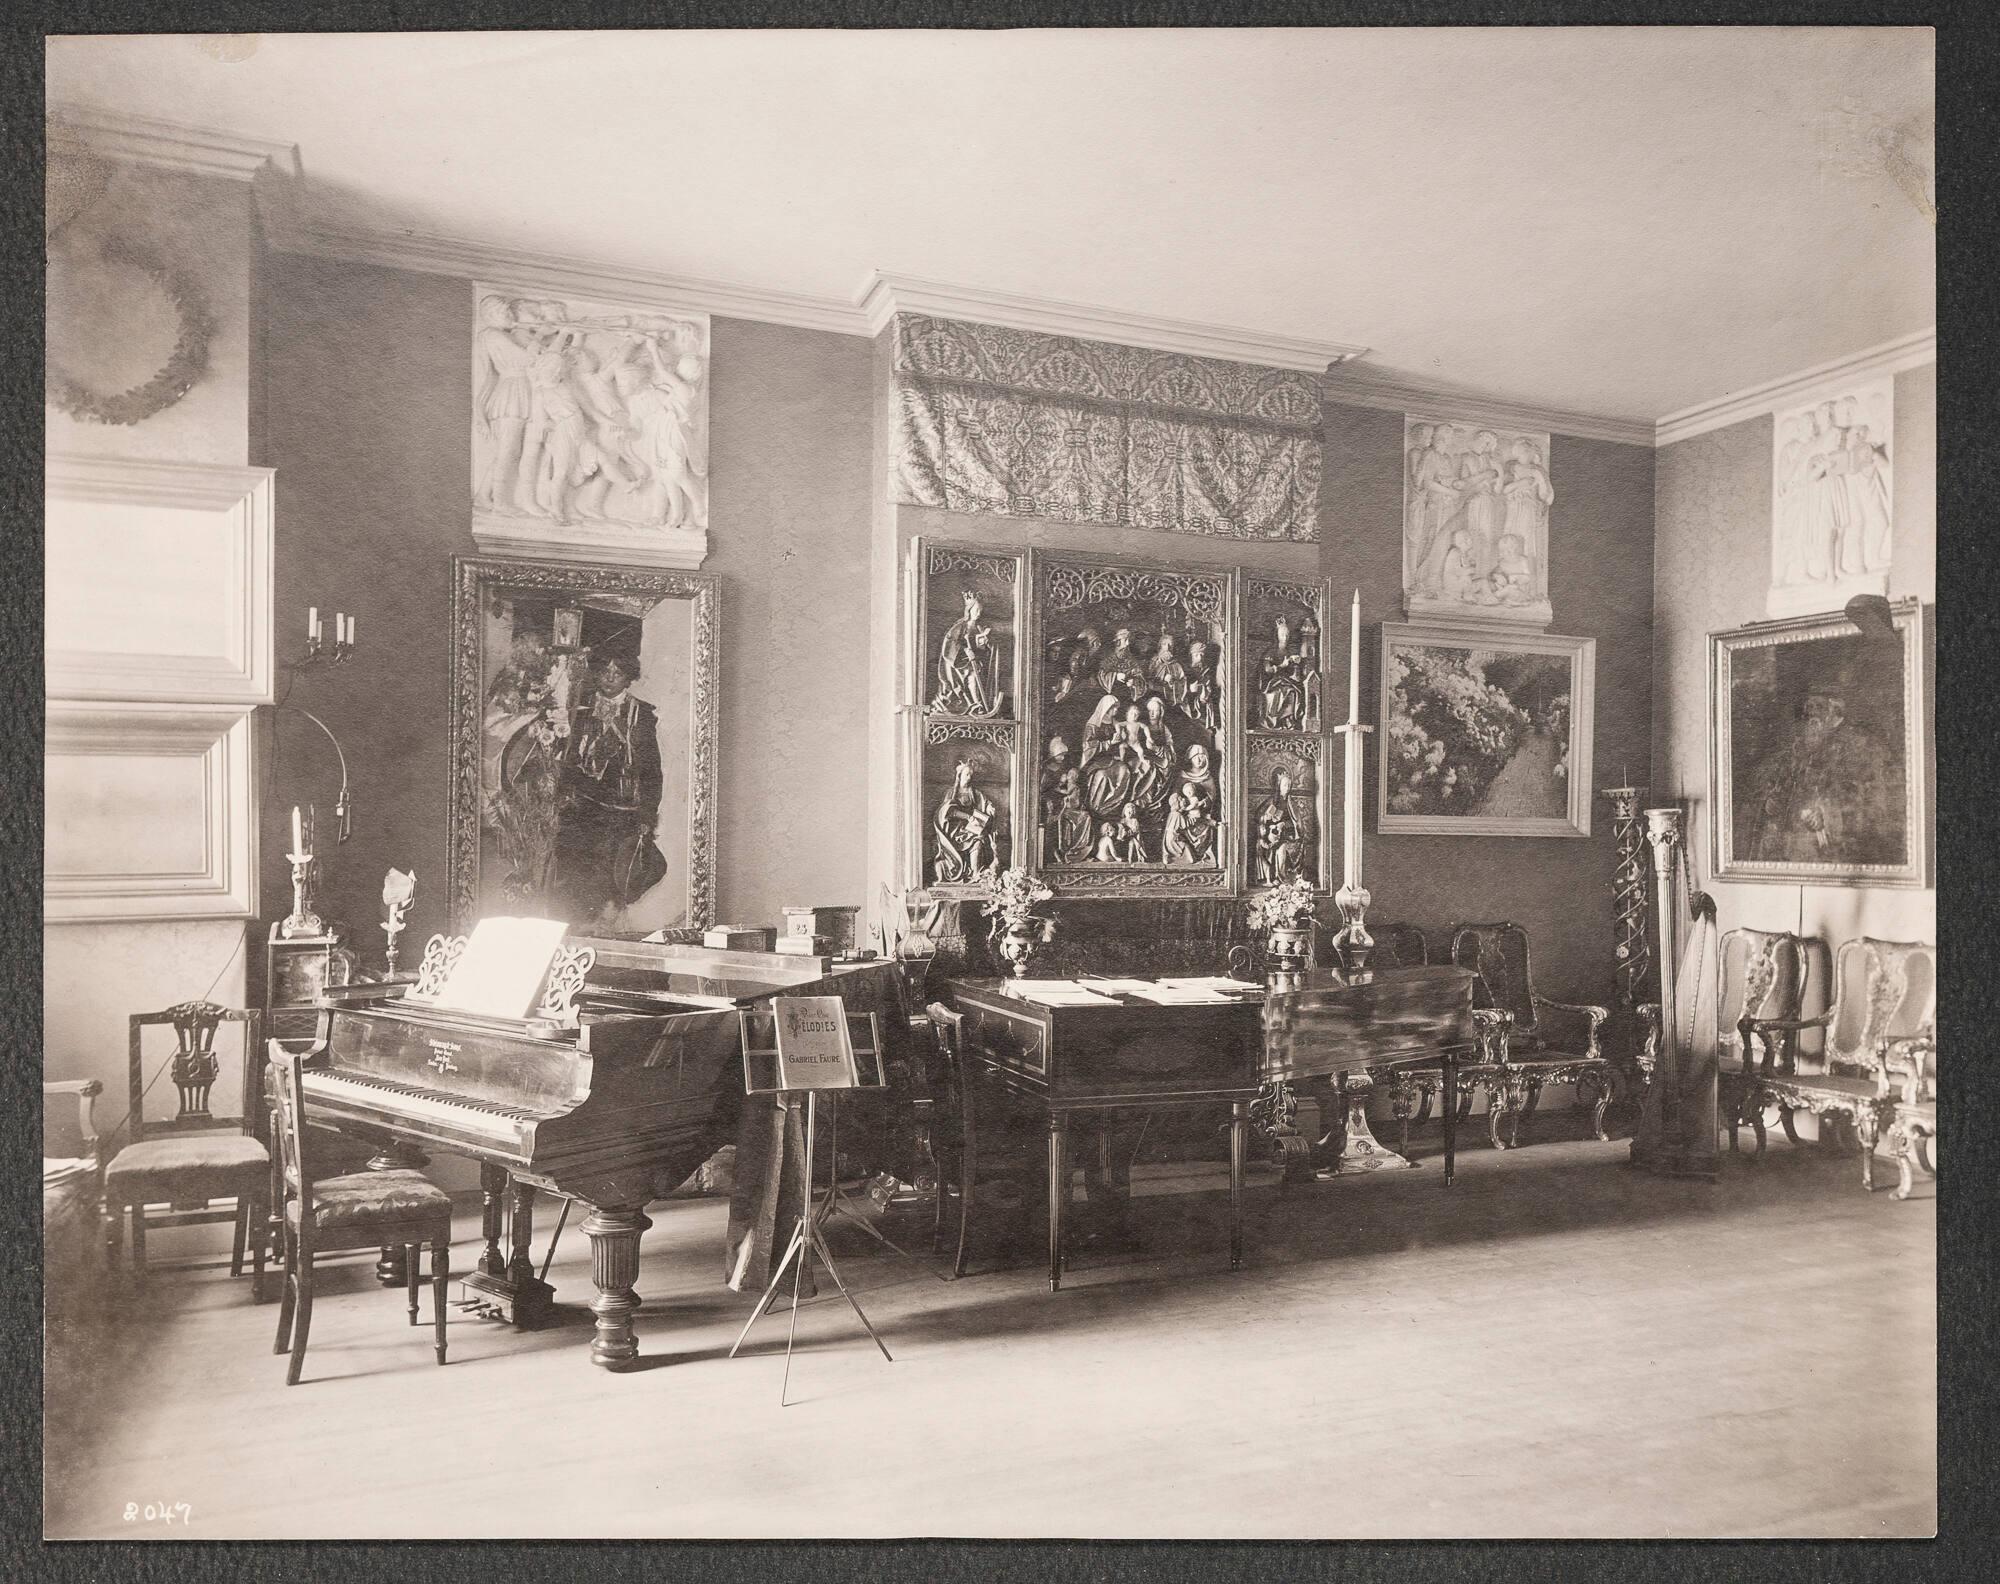 Opulent 19th century domestic interior of Isabella Stewart Gardner’s home, crowded with paintings, furniture and decorative arts. The room contains a piano and a harpsichord. Chairs line the wall hung with paintings and a large wooden altarpiece.  